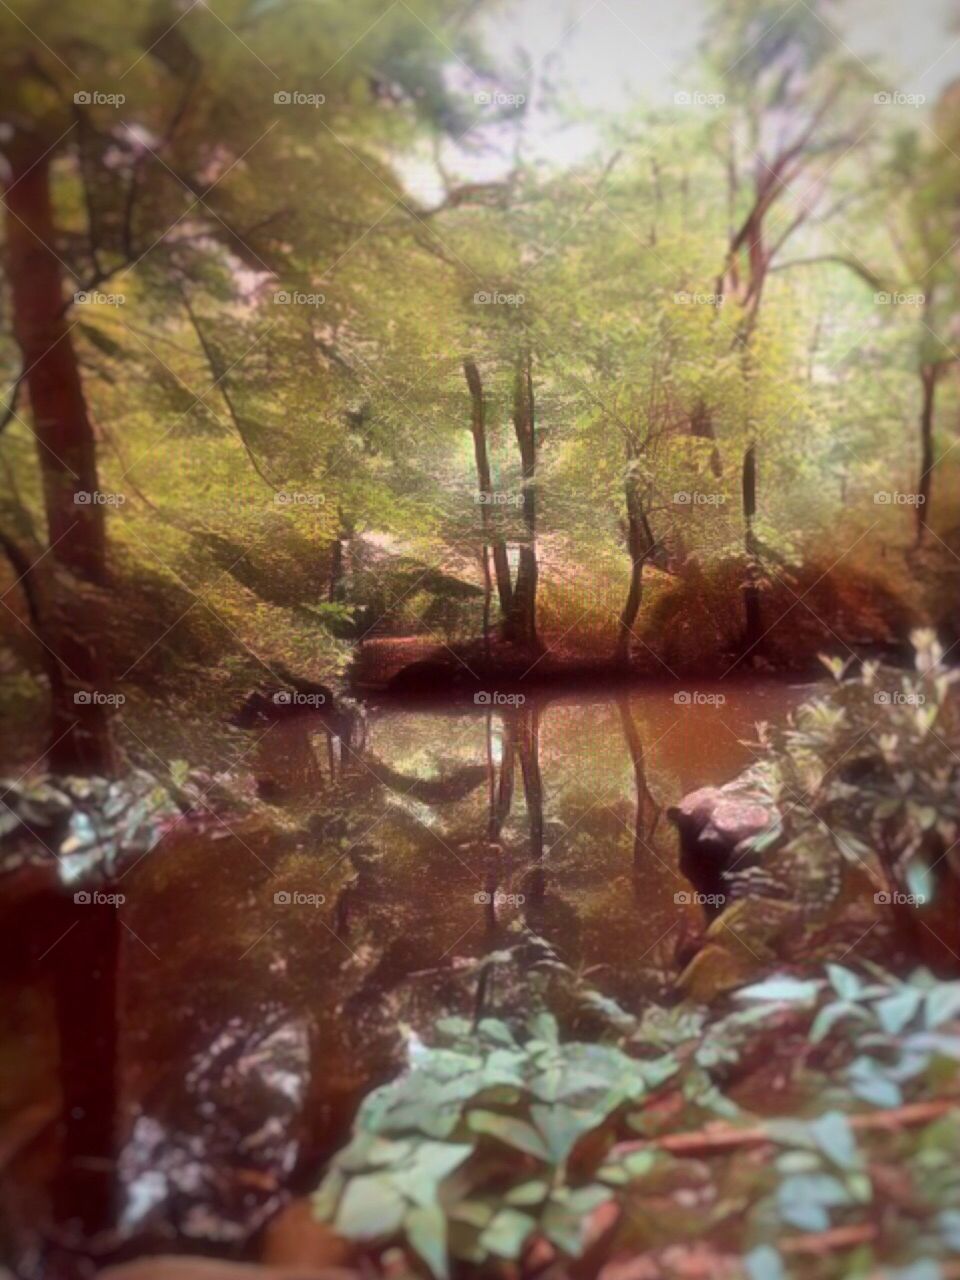 Nature/Landscape, The Ramble - Central Park, New York City. Instagram,@PennyPeronto